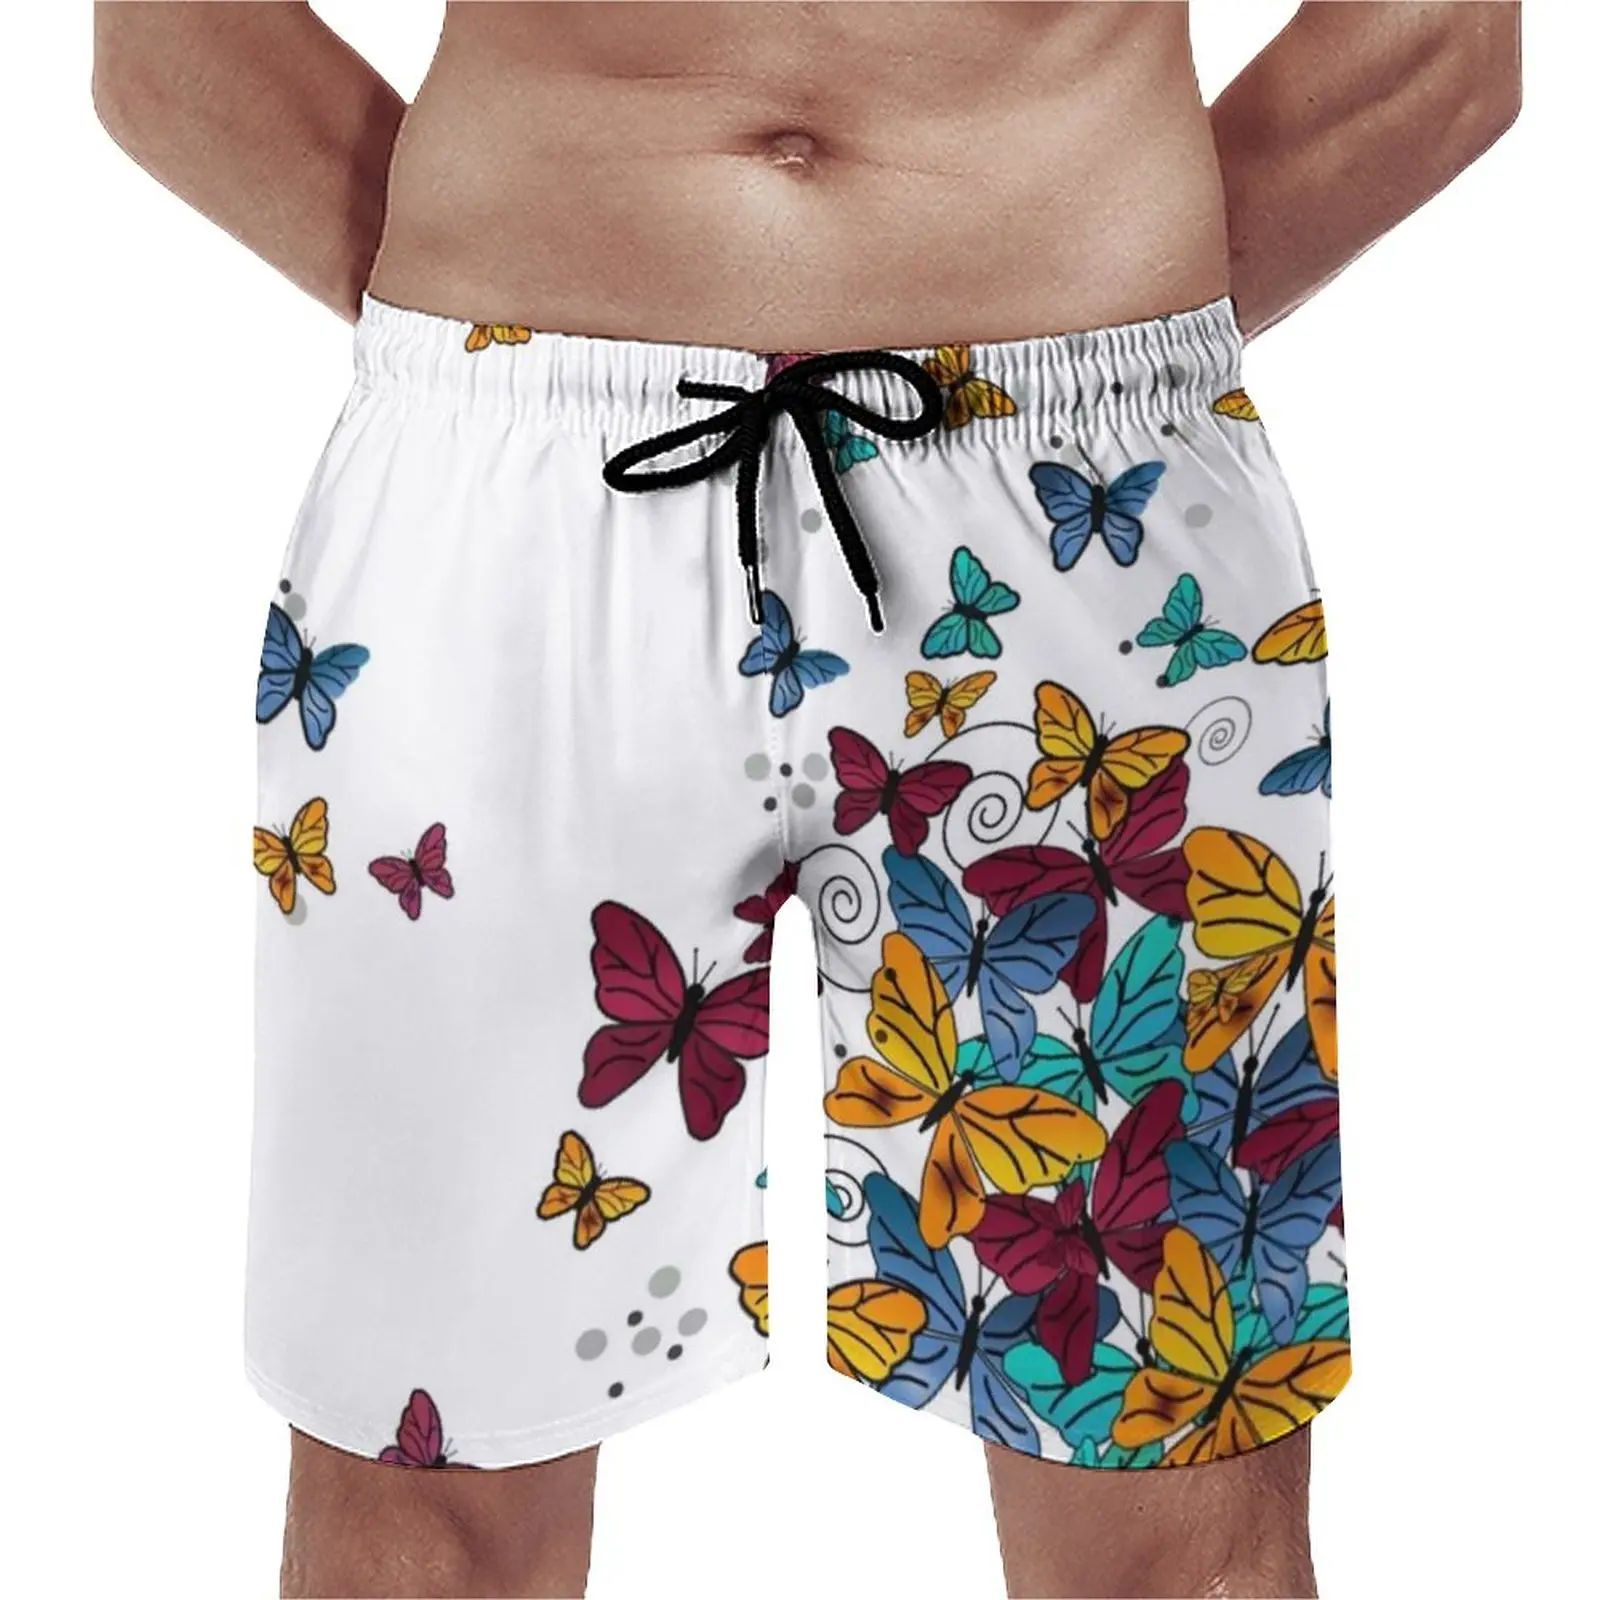 

Fly Away Butterfly Board Shorts Lots of Butterflies Freedom Funny Beach Short Pants Custom Sports Fitness Quick Dry Swim Trunks